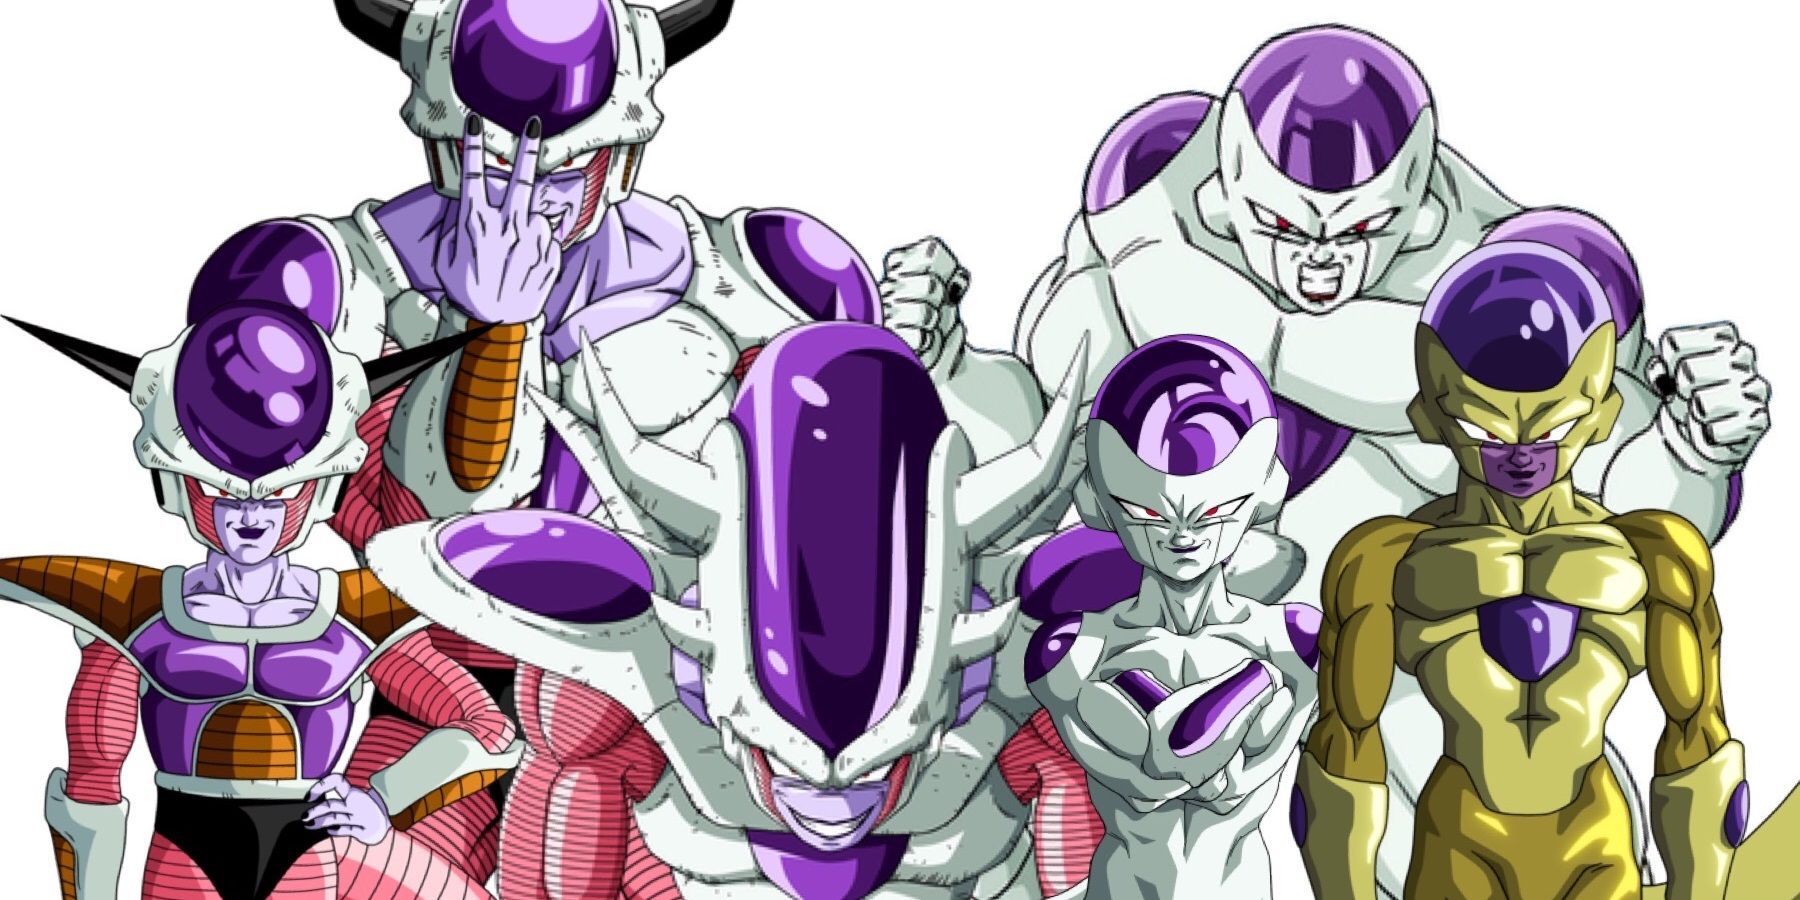 All Frieza transformations leading up to Golden Frieza in Dragon Ball Super